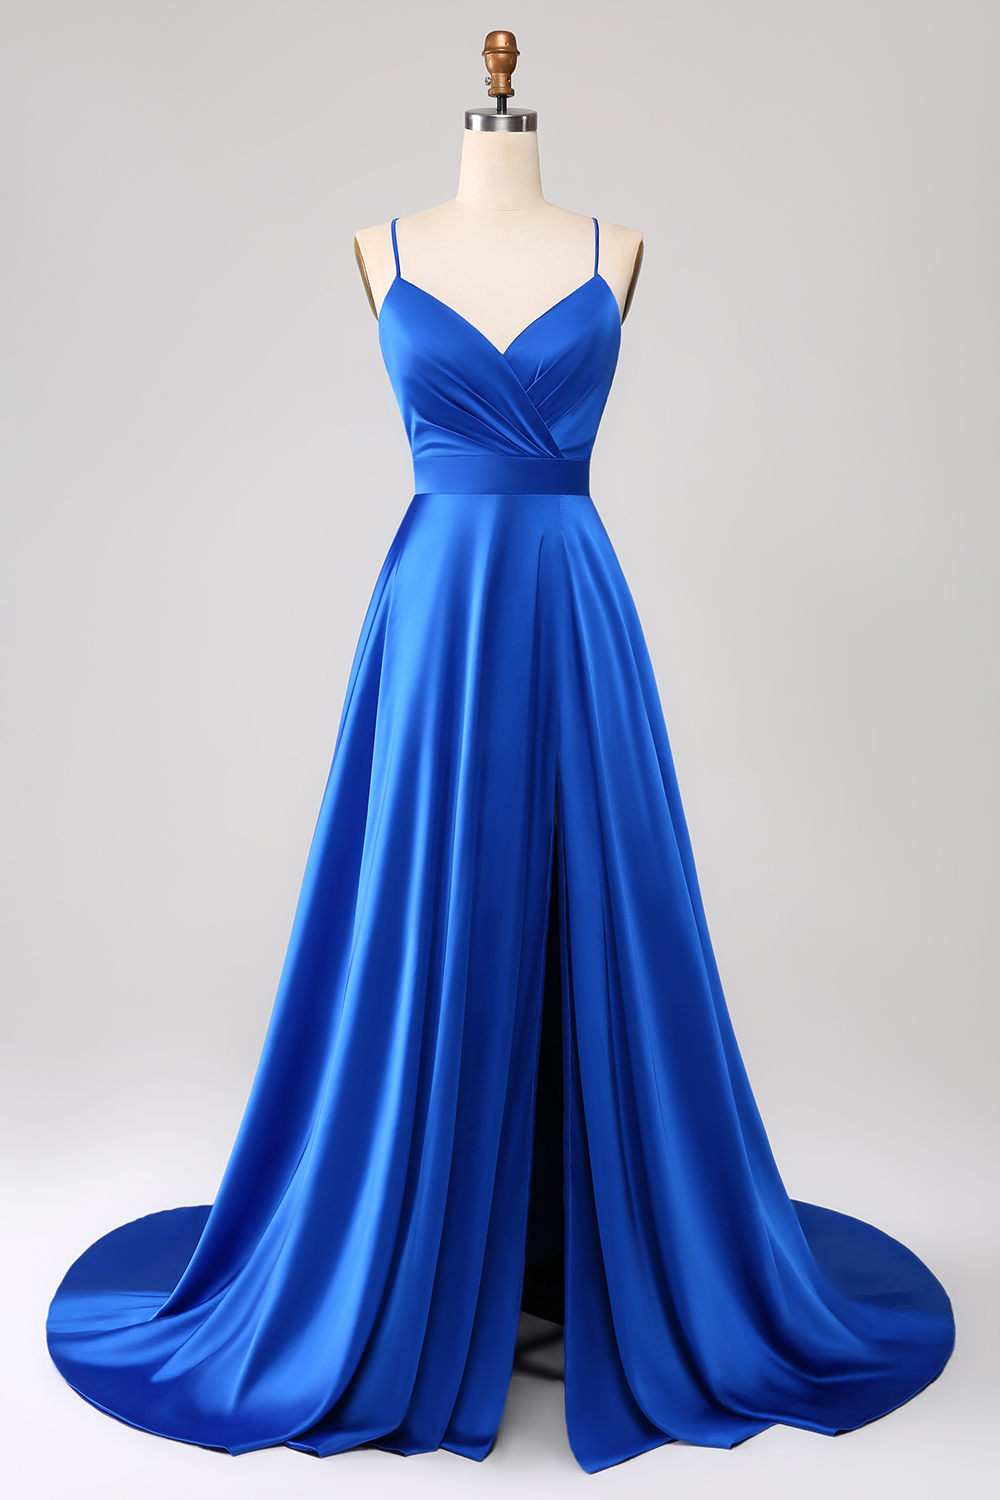 Leely Women Royal Blue A Line Prom Dress Spaghetti Straps Satin Long Party Evening Dress with Slit